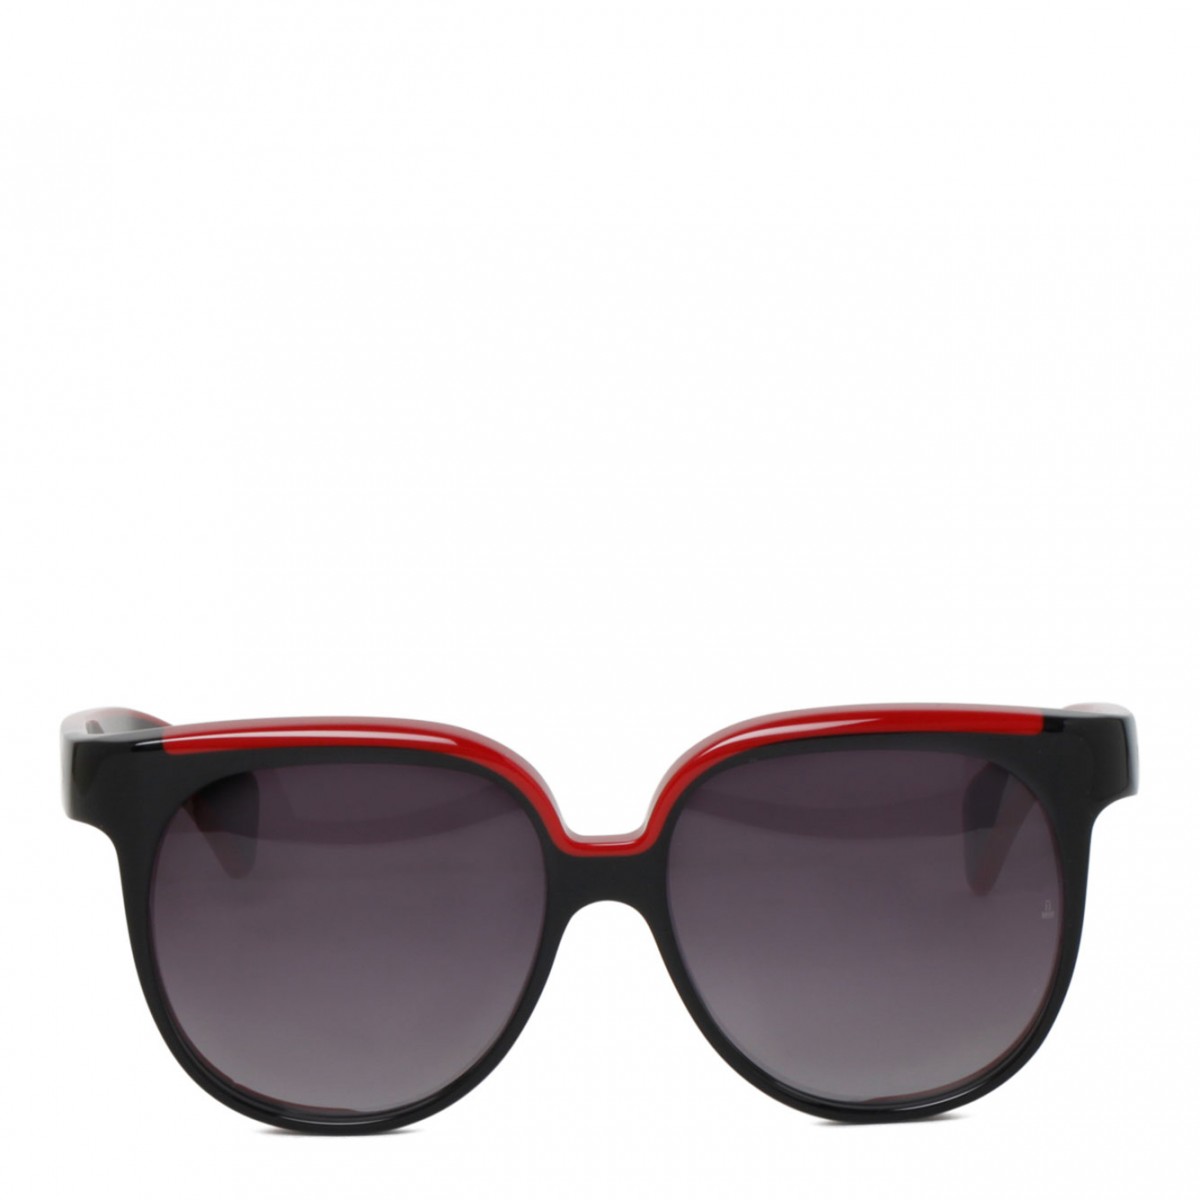 Black and Red Cleveland Sunglasses